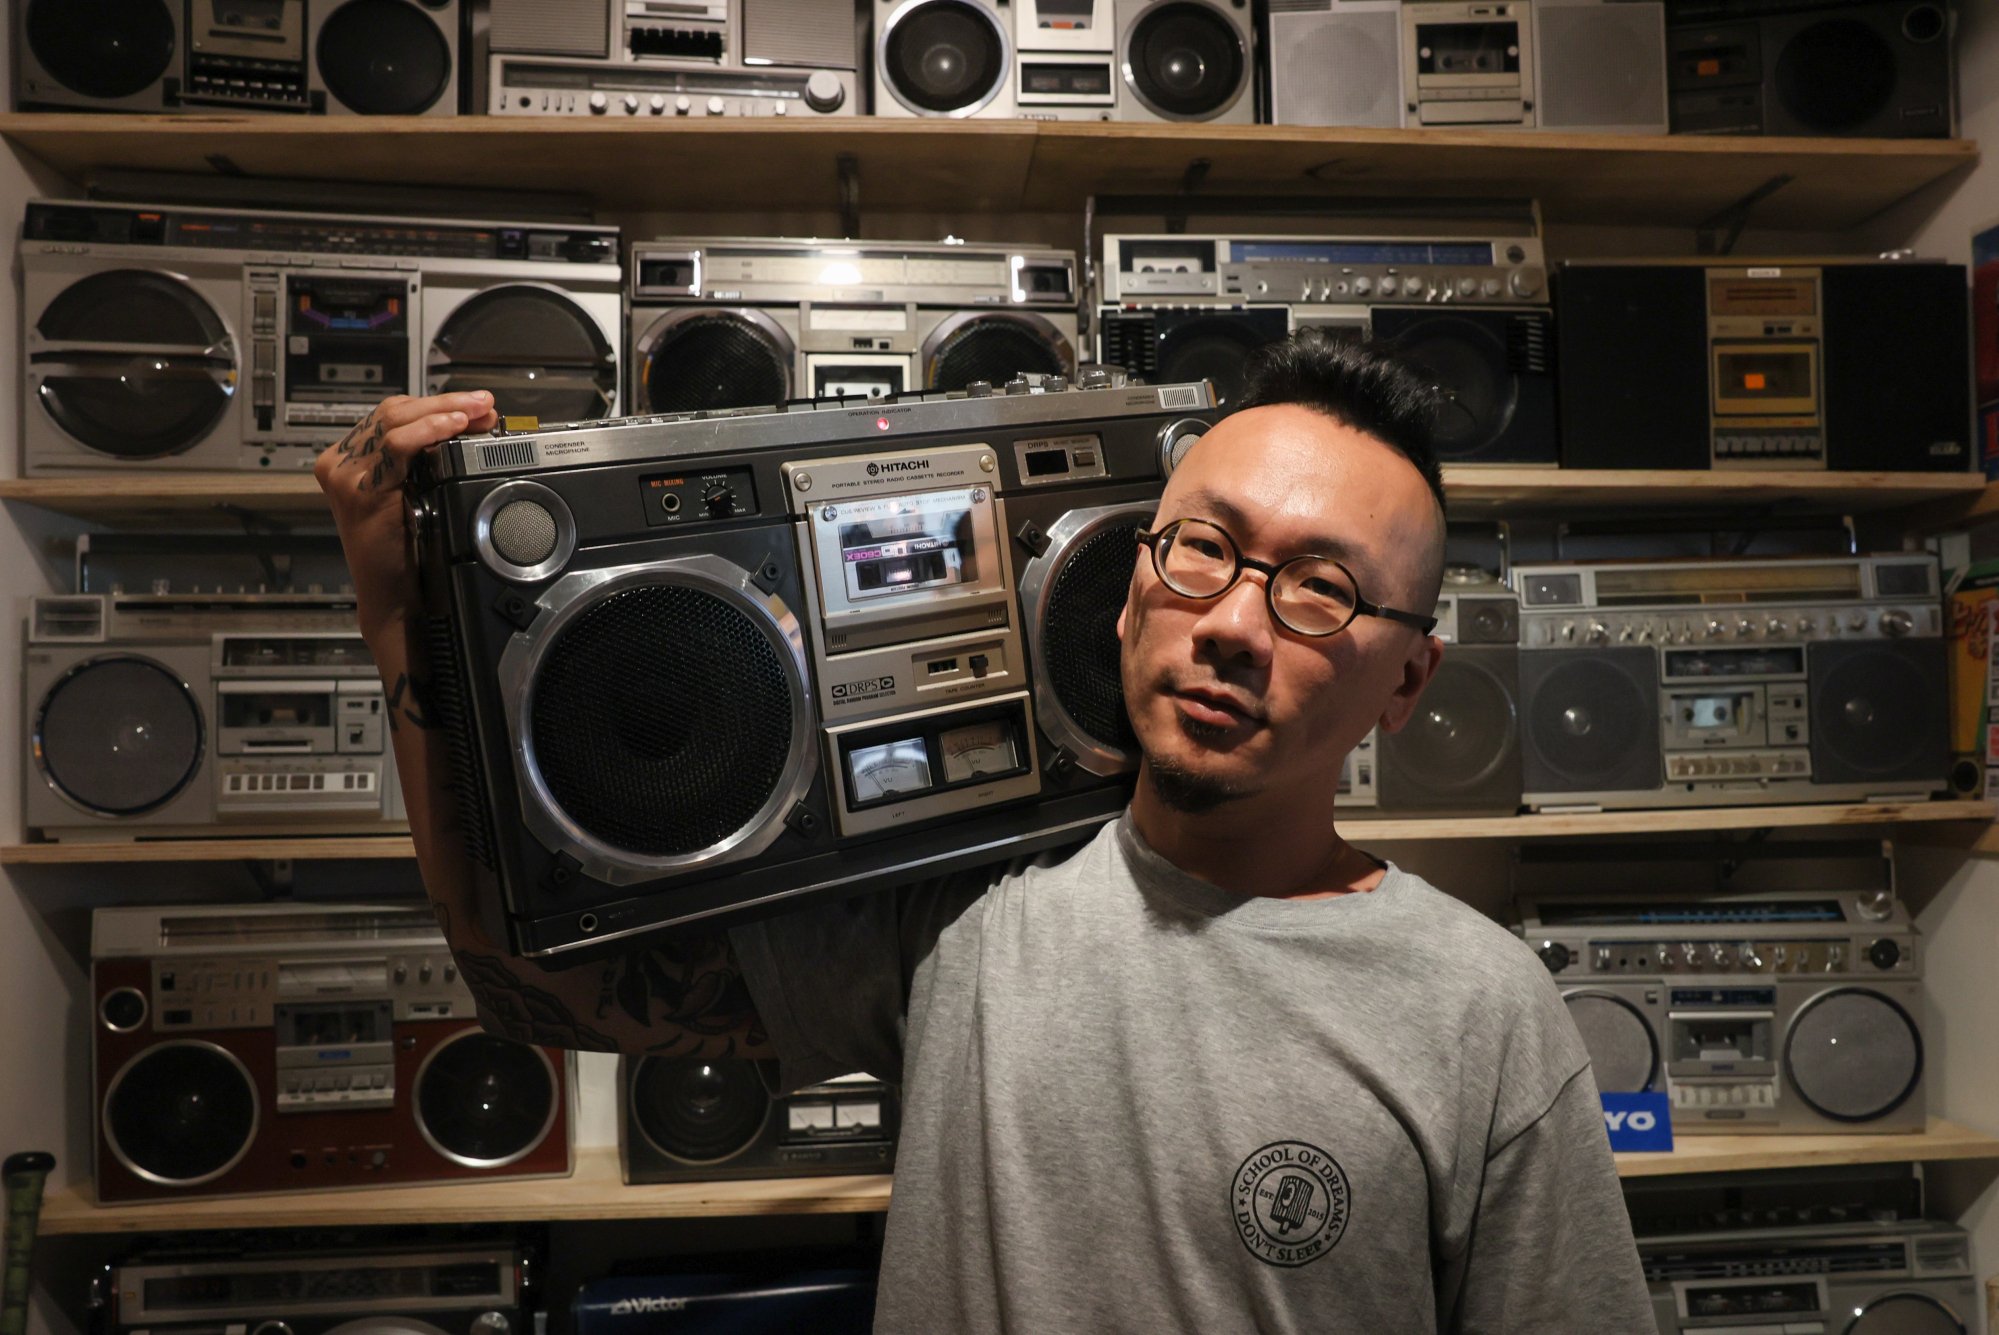 Chow Yin-chi holds a Hitachi portable stereo radio cassette player. Photo: Dickson Lee